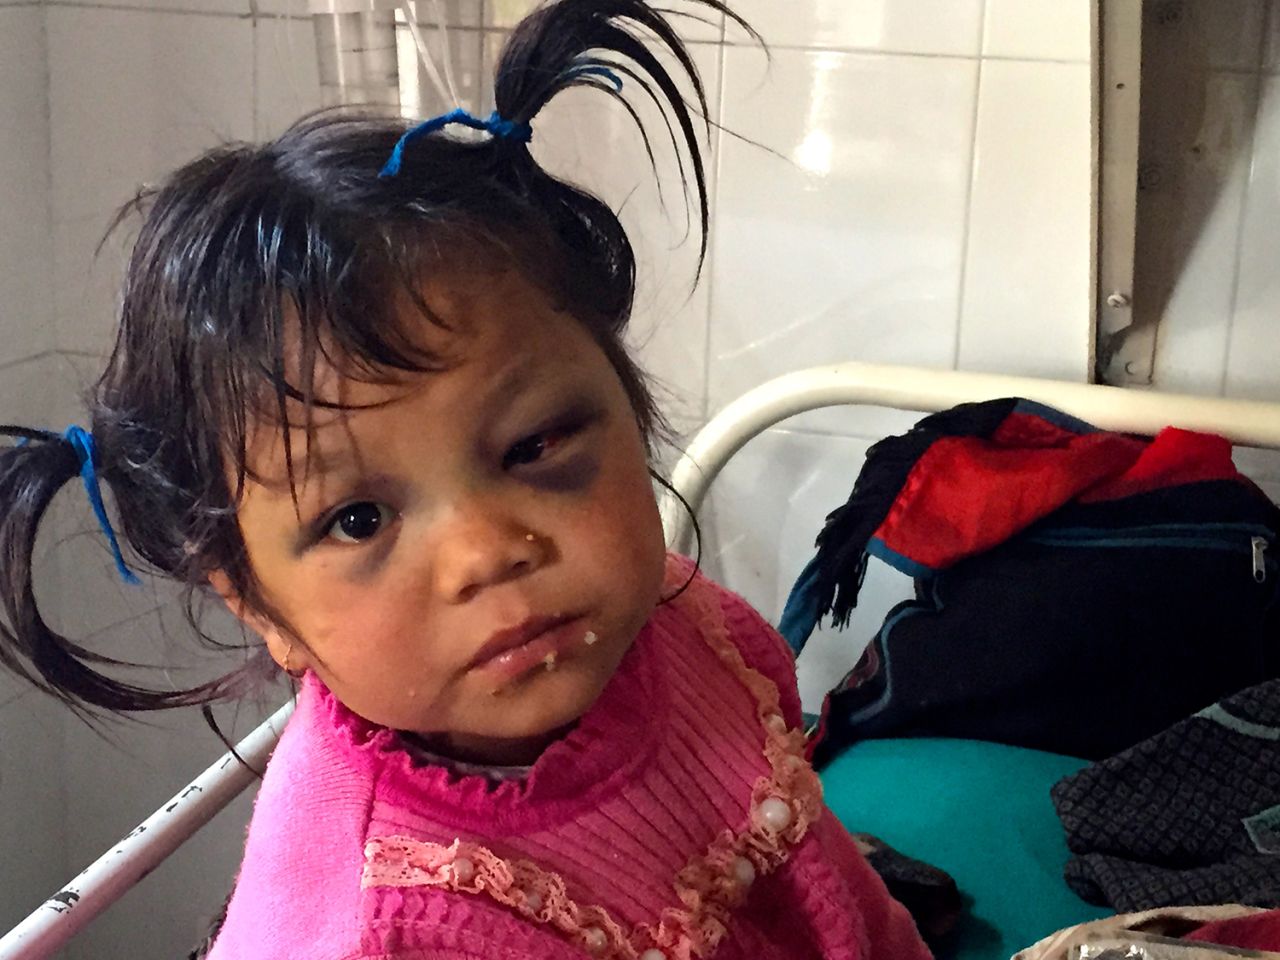 Maya's 5-year-old cousin Manisha was with her when the earthquake struck. She, too, was badly injured.